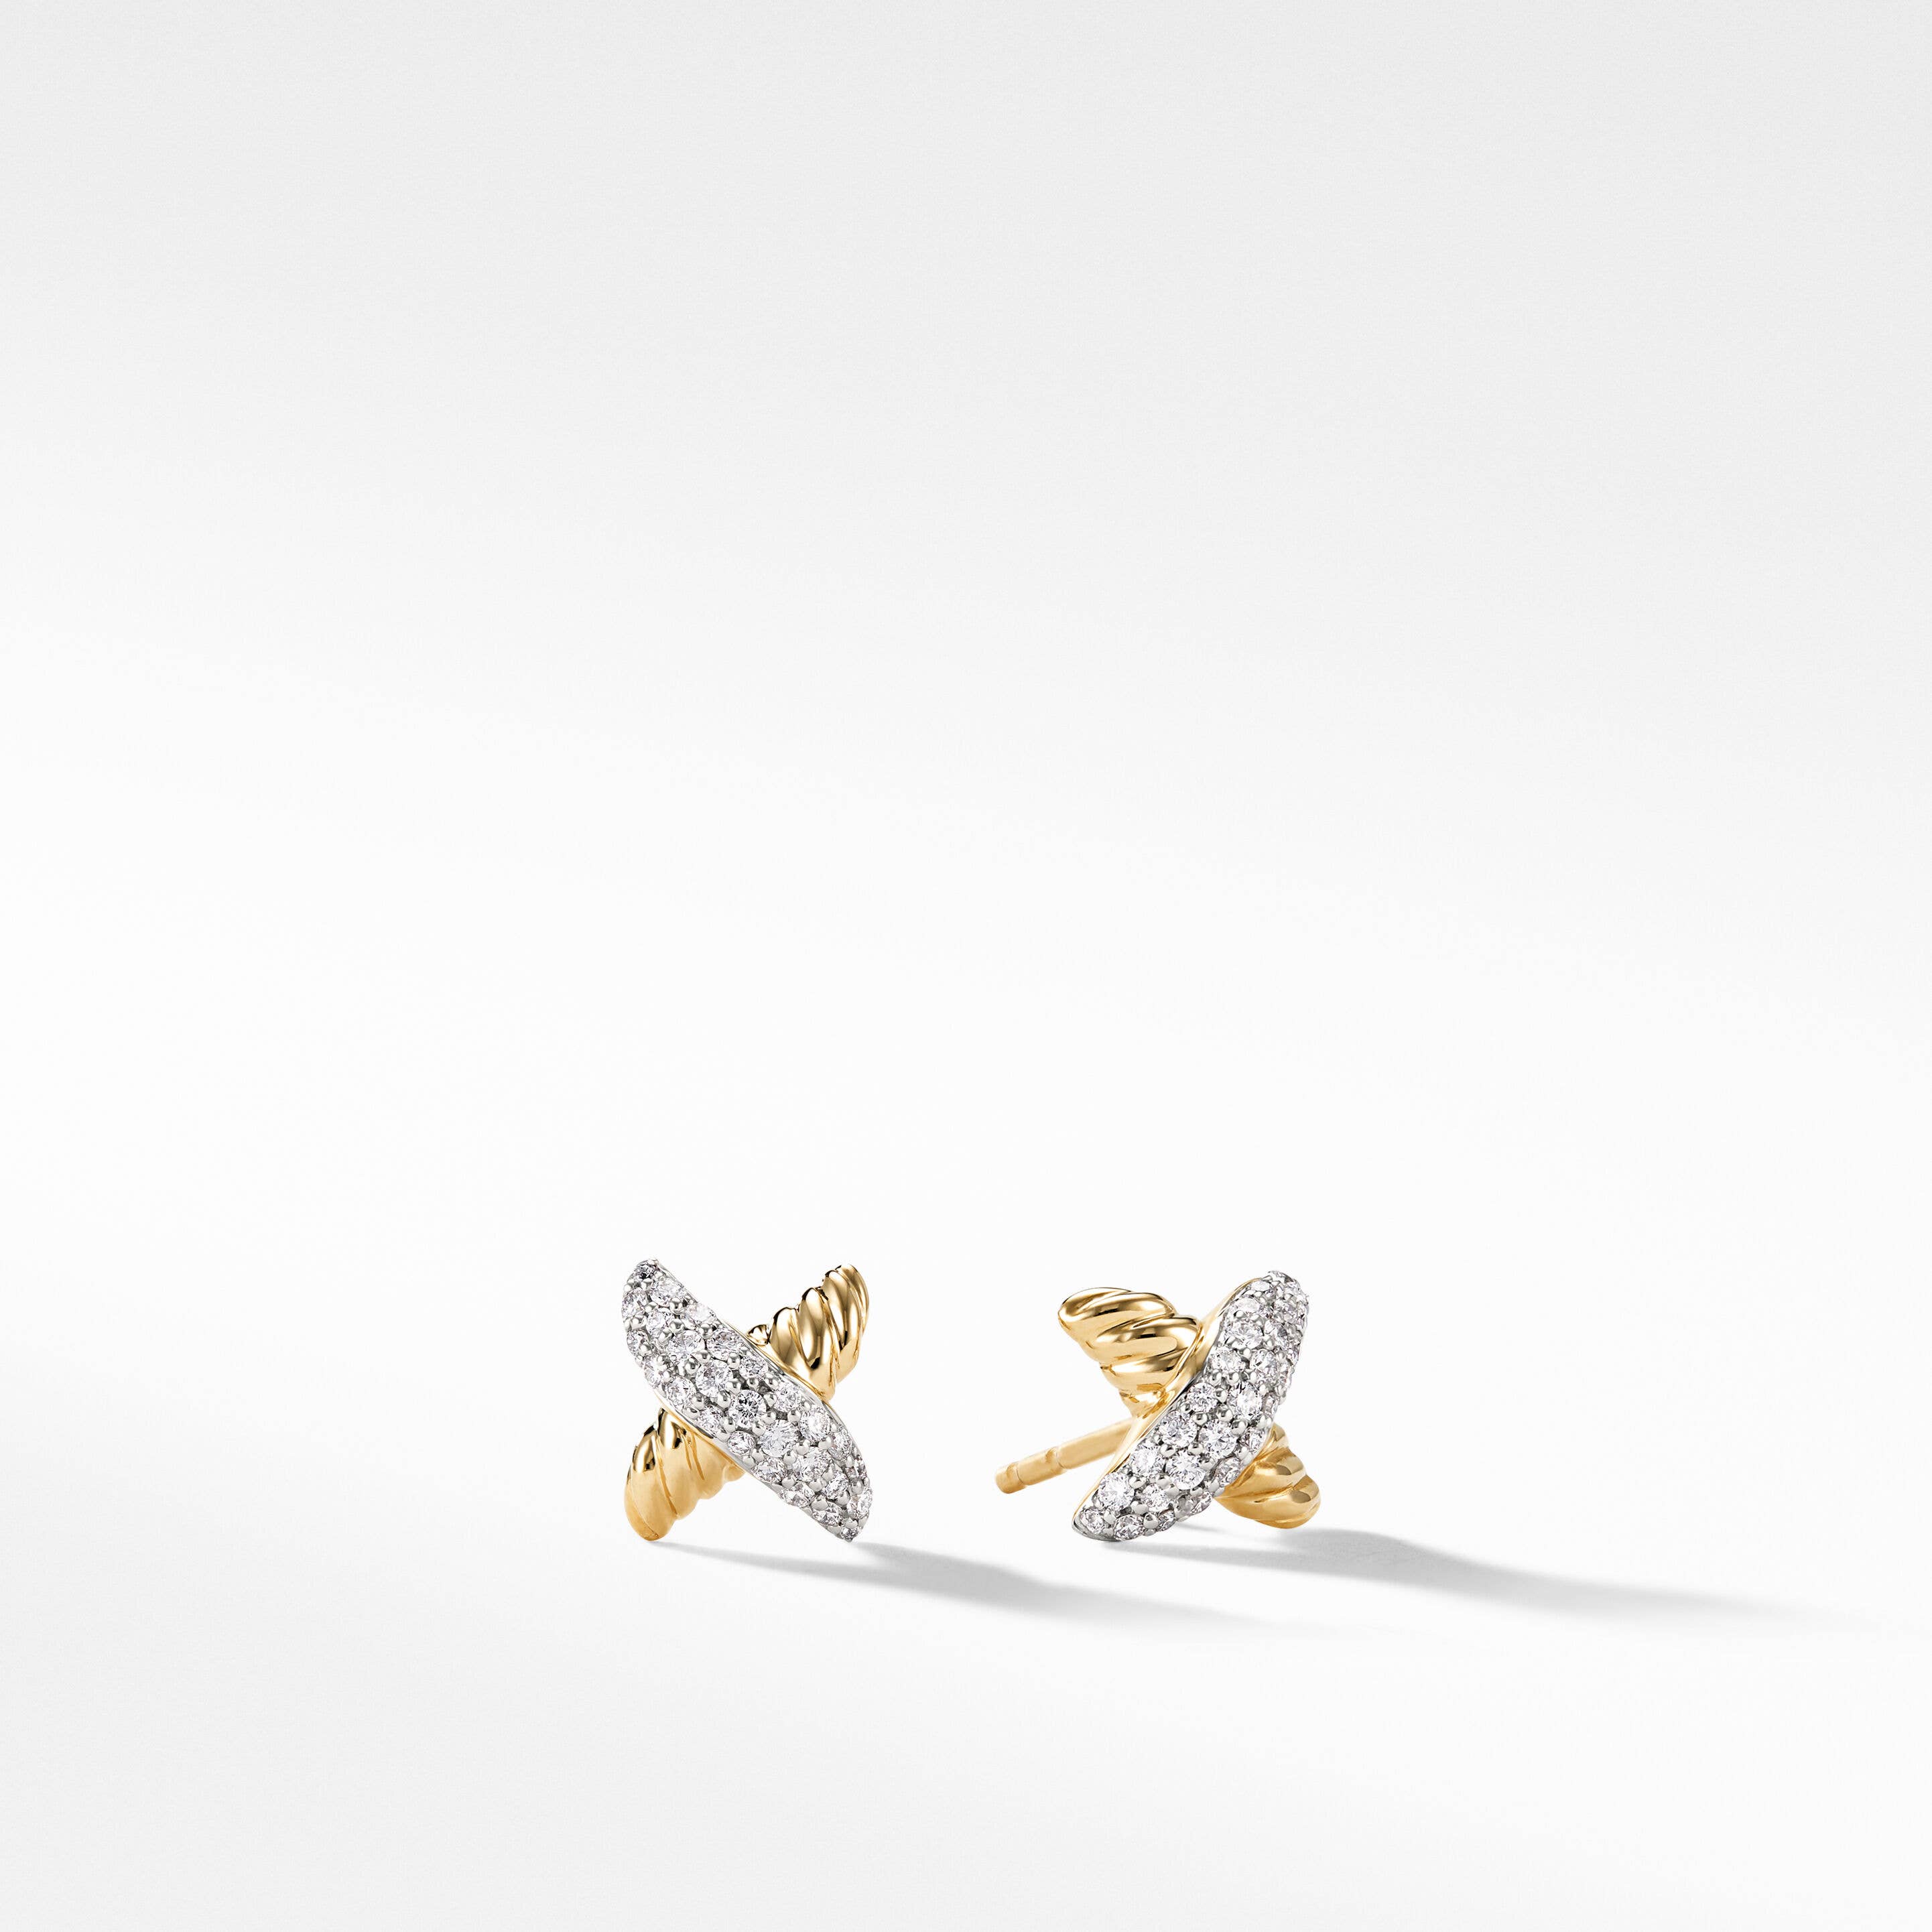 Petite X Stud Earrings in 18K Yellow Gold with Pavé Diamonds